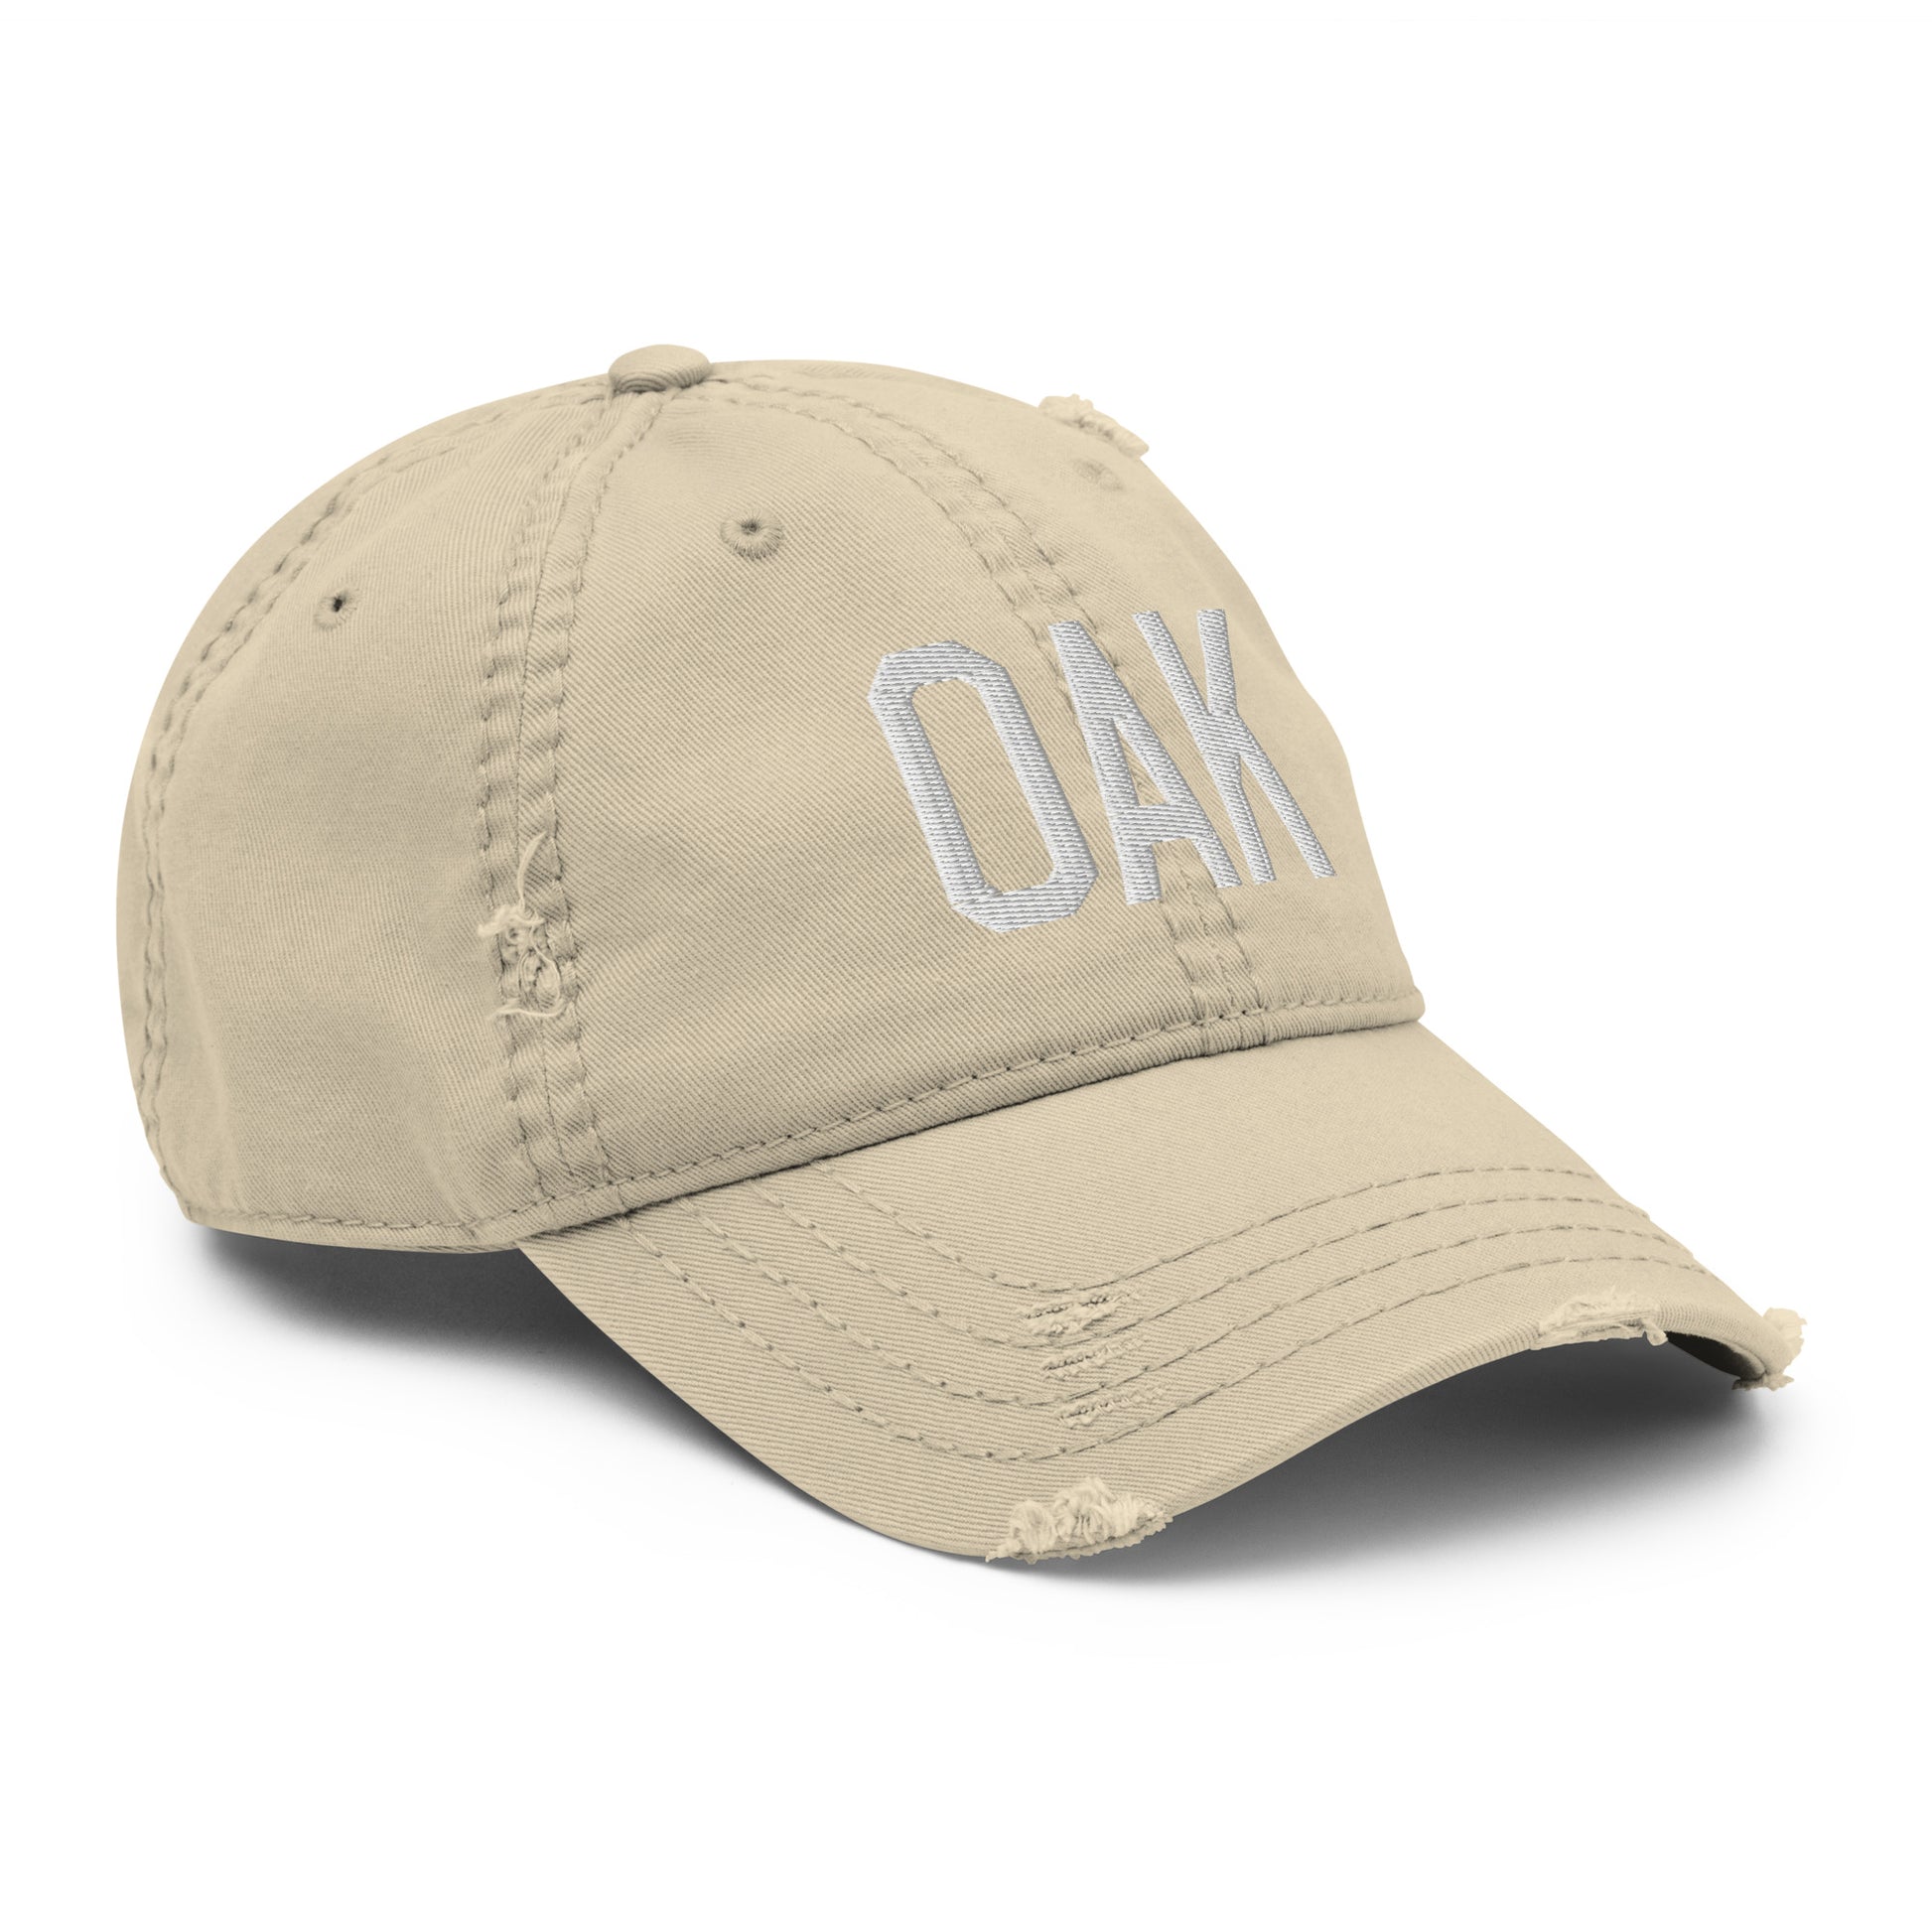 Airport Code Distressed Hat - White • OAK Oakland • YHM Designs - Image 20